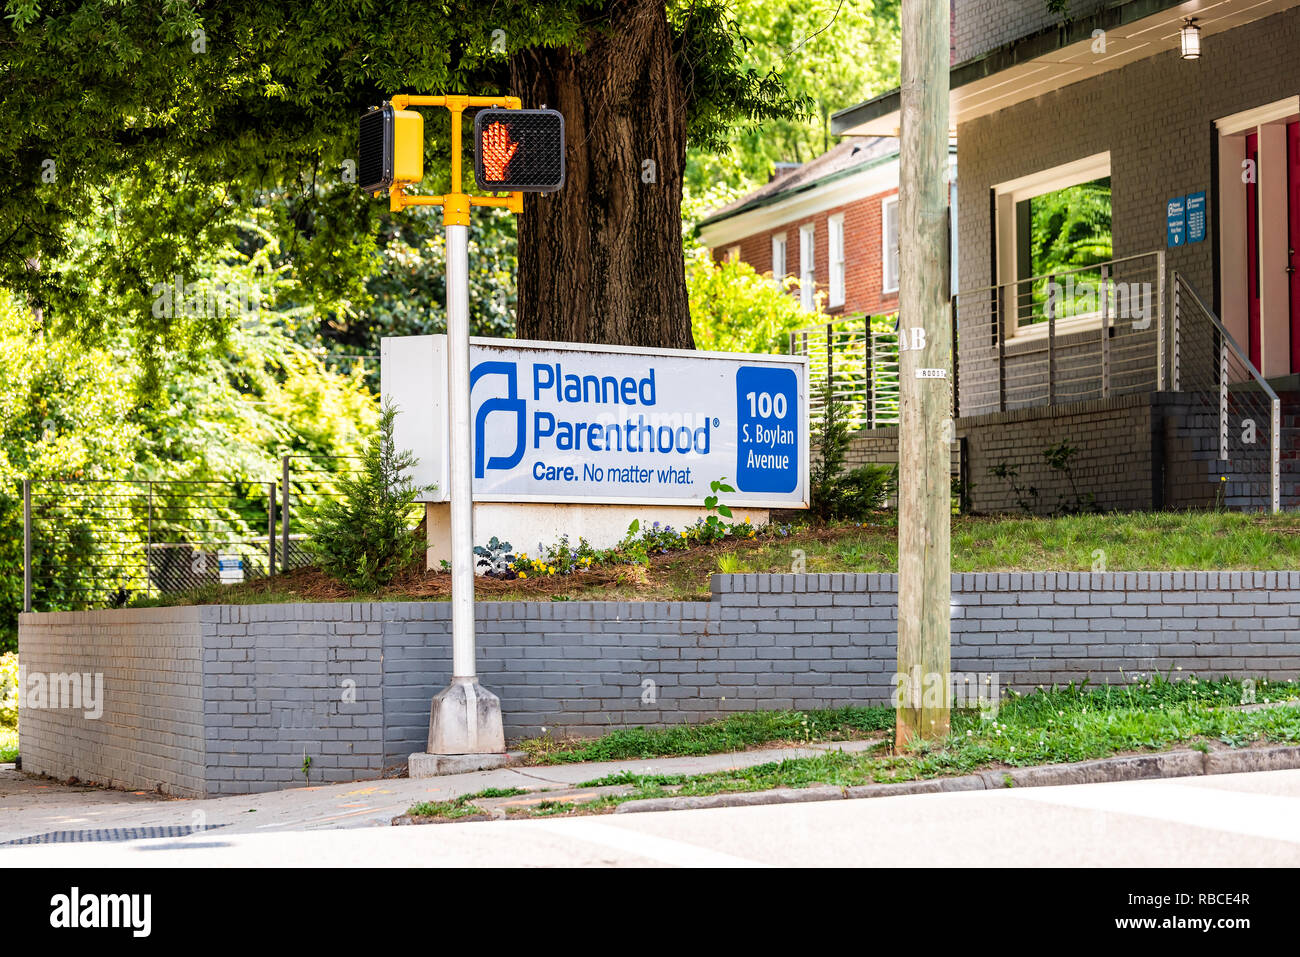 Raleigh, USA - May 13, 2018: Downtown North Carolina city during summer day with pedestrian traffic light on street and planned parenthood building si Stock Photo